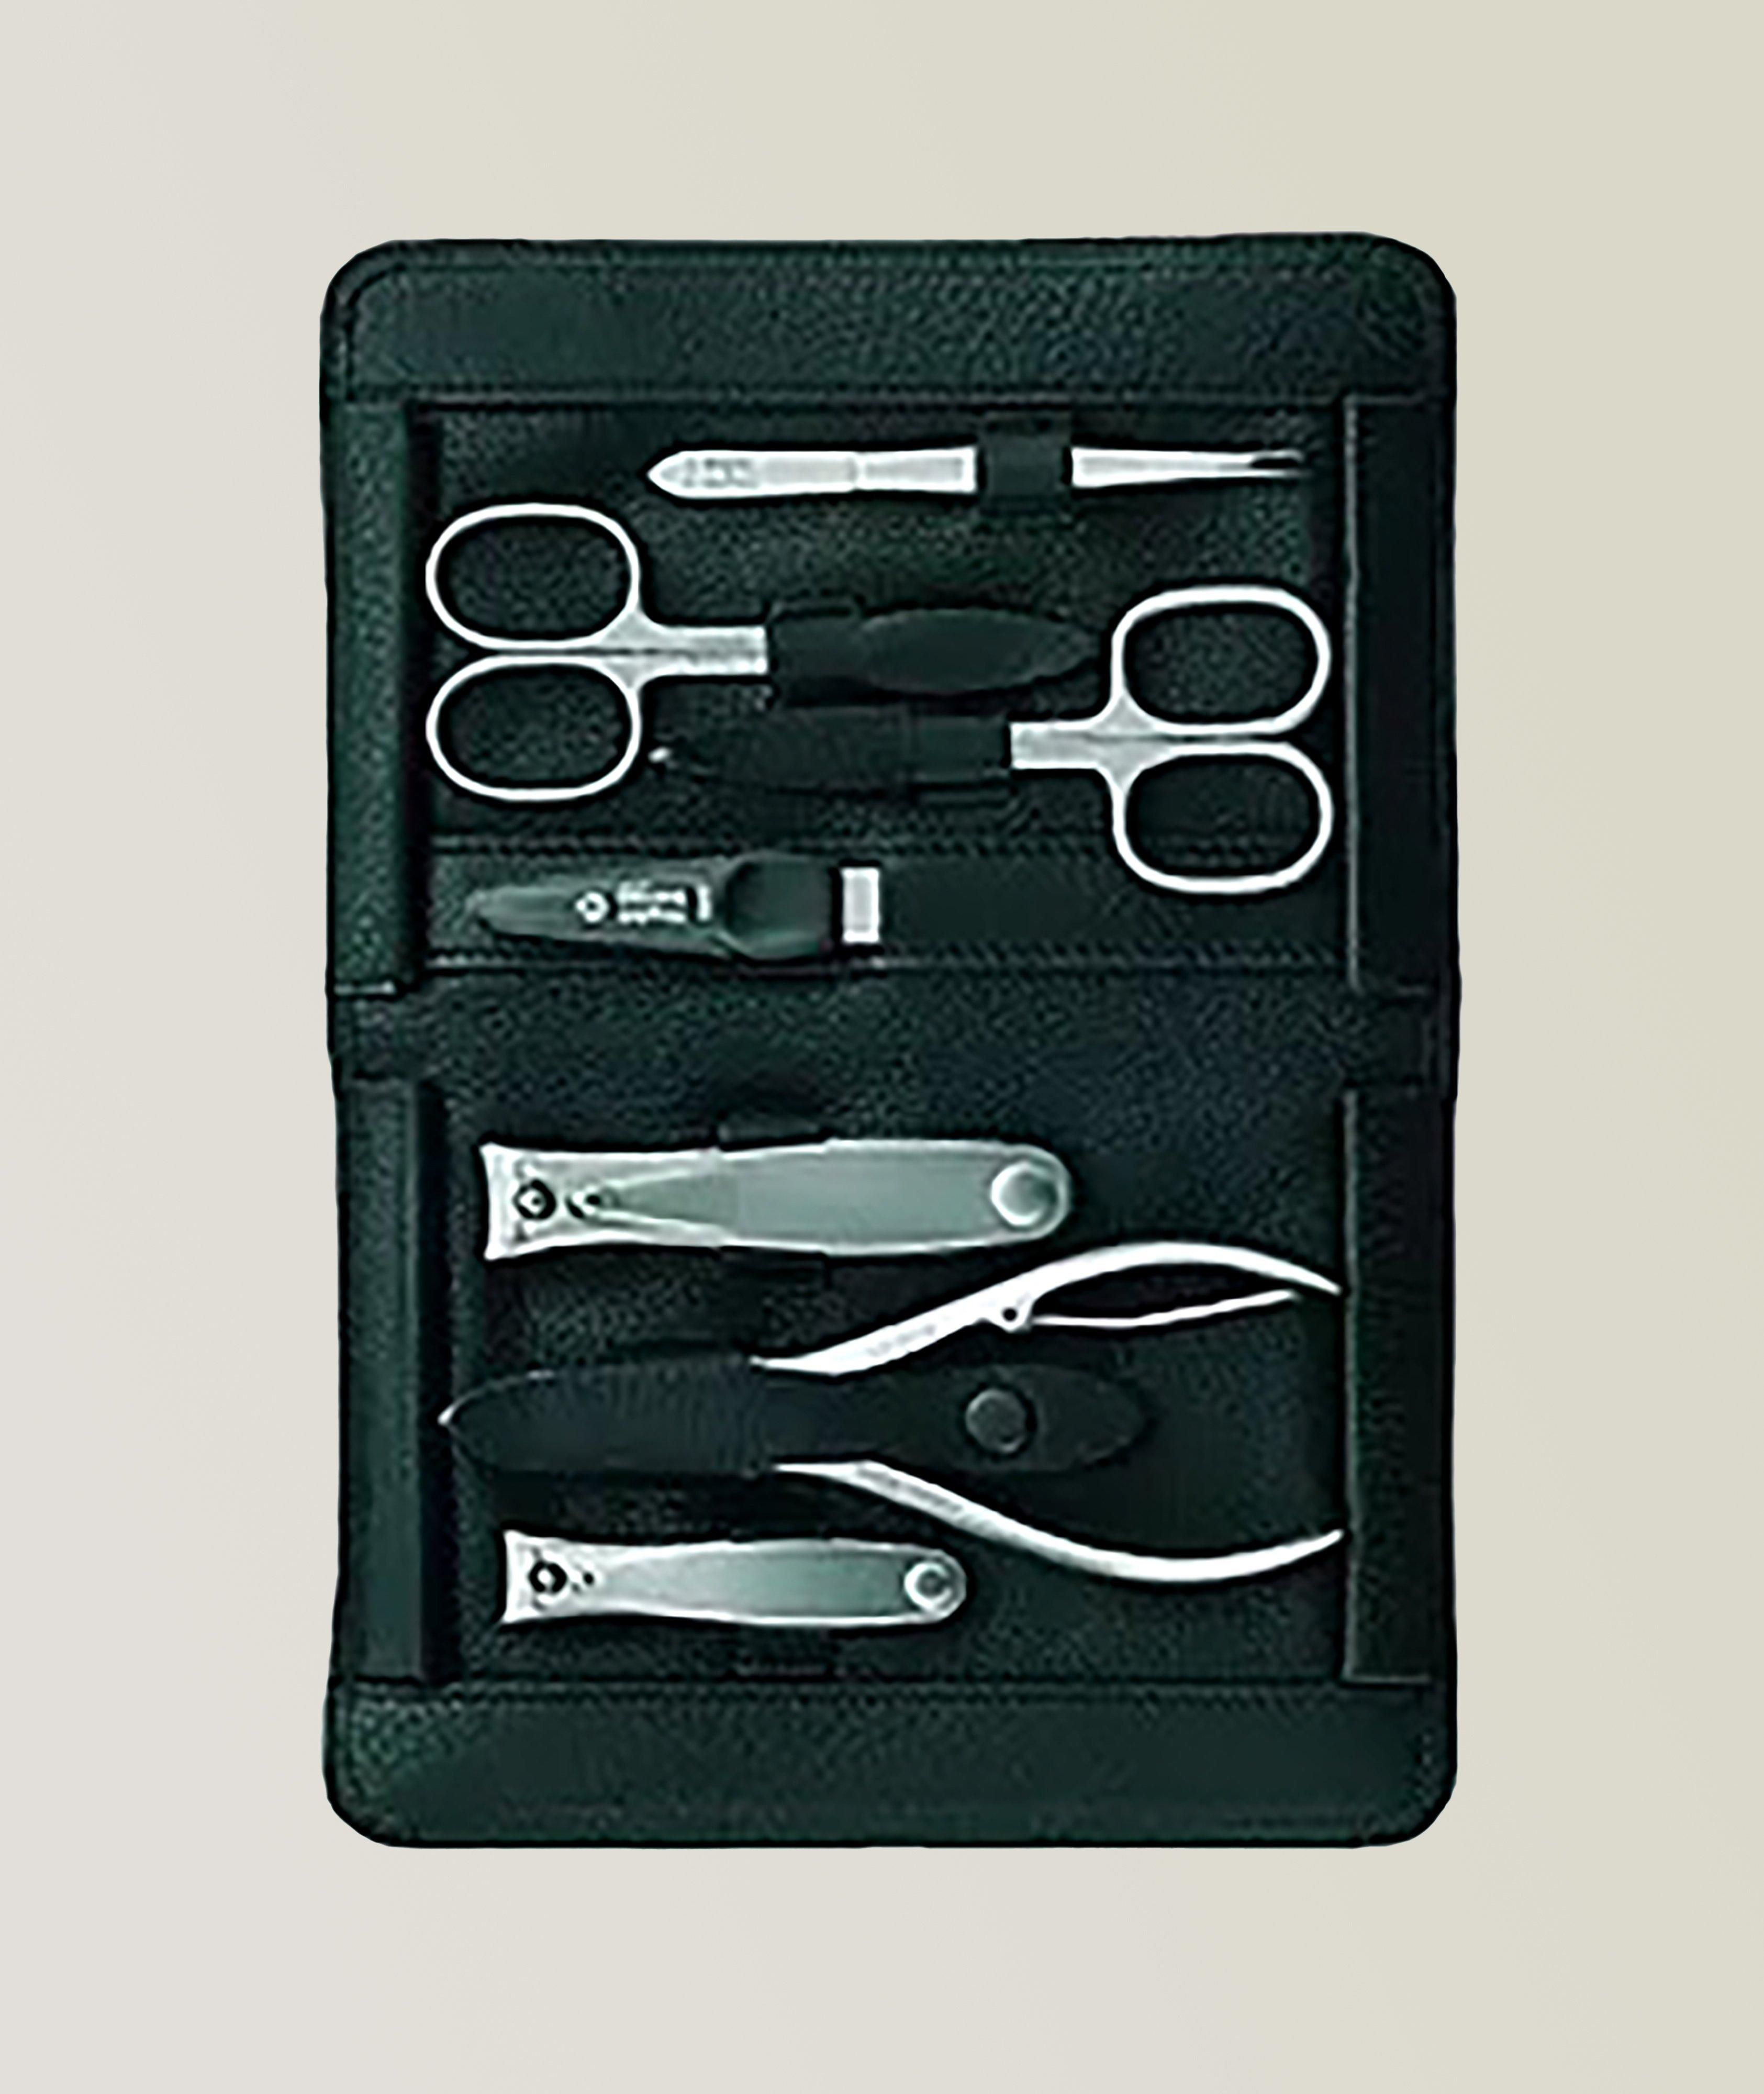 Imantado XL 7pc Manicure Set In High Quality Leather Case image 0